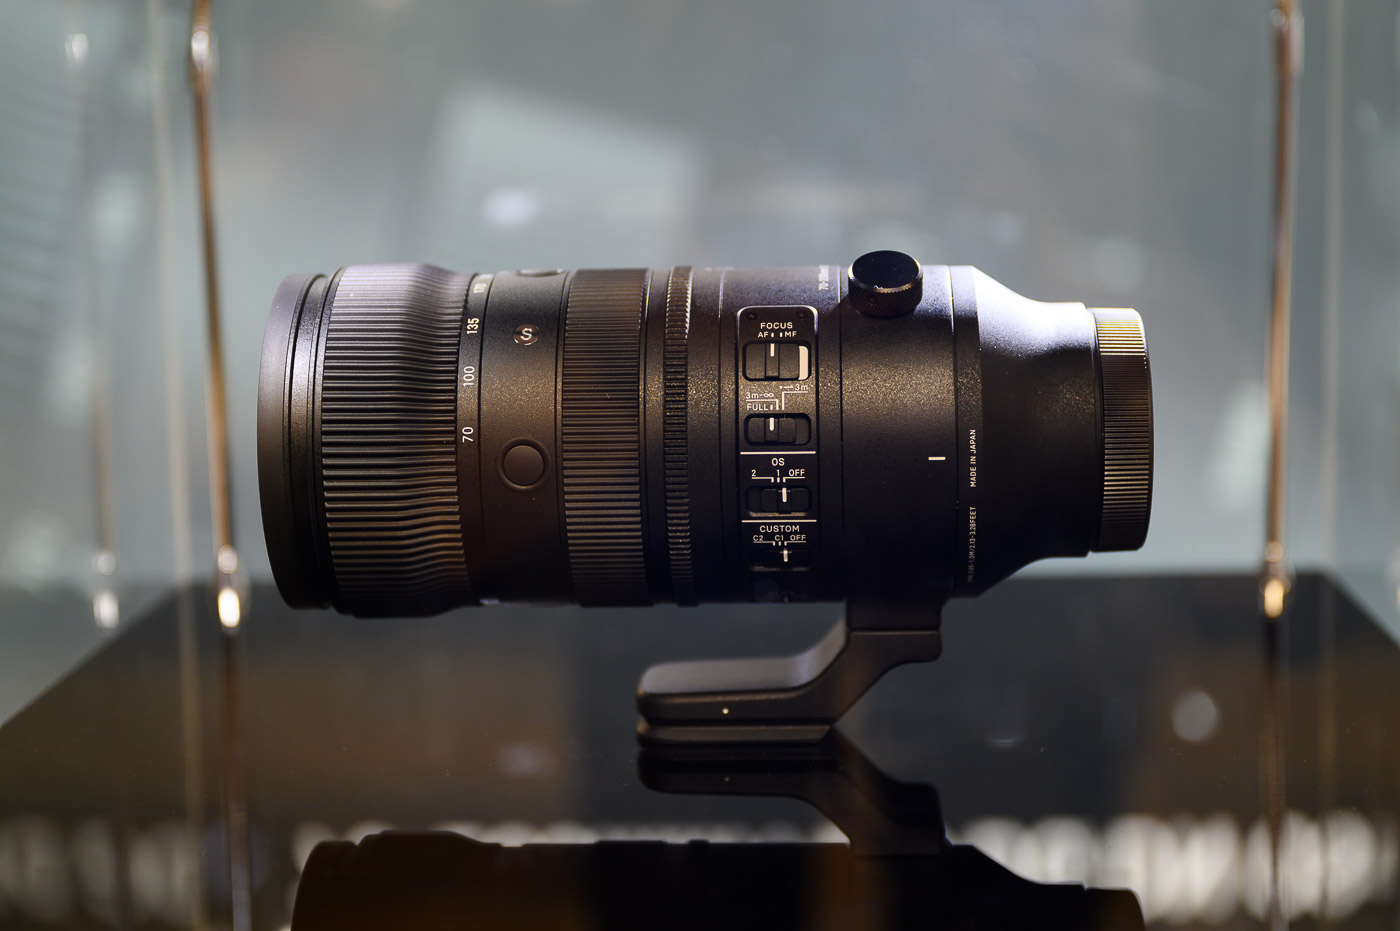 Additional information on the upcoming Sigma 70-200mm f/2.8 DG DN OS Sports  lens (E+L mount) - Photo Rumors